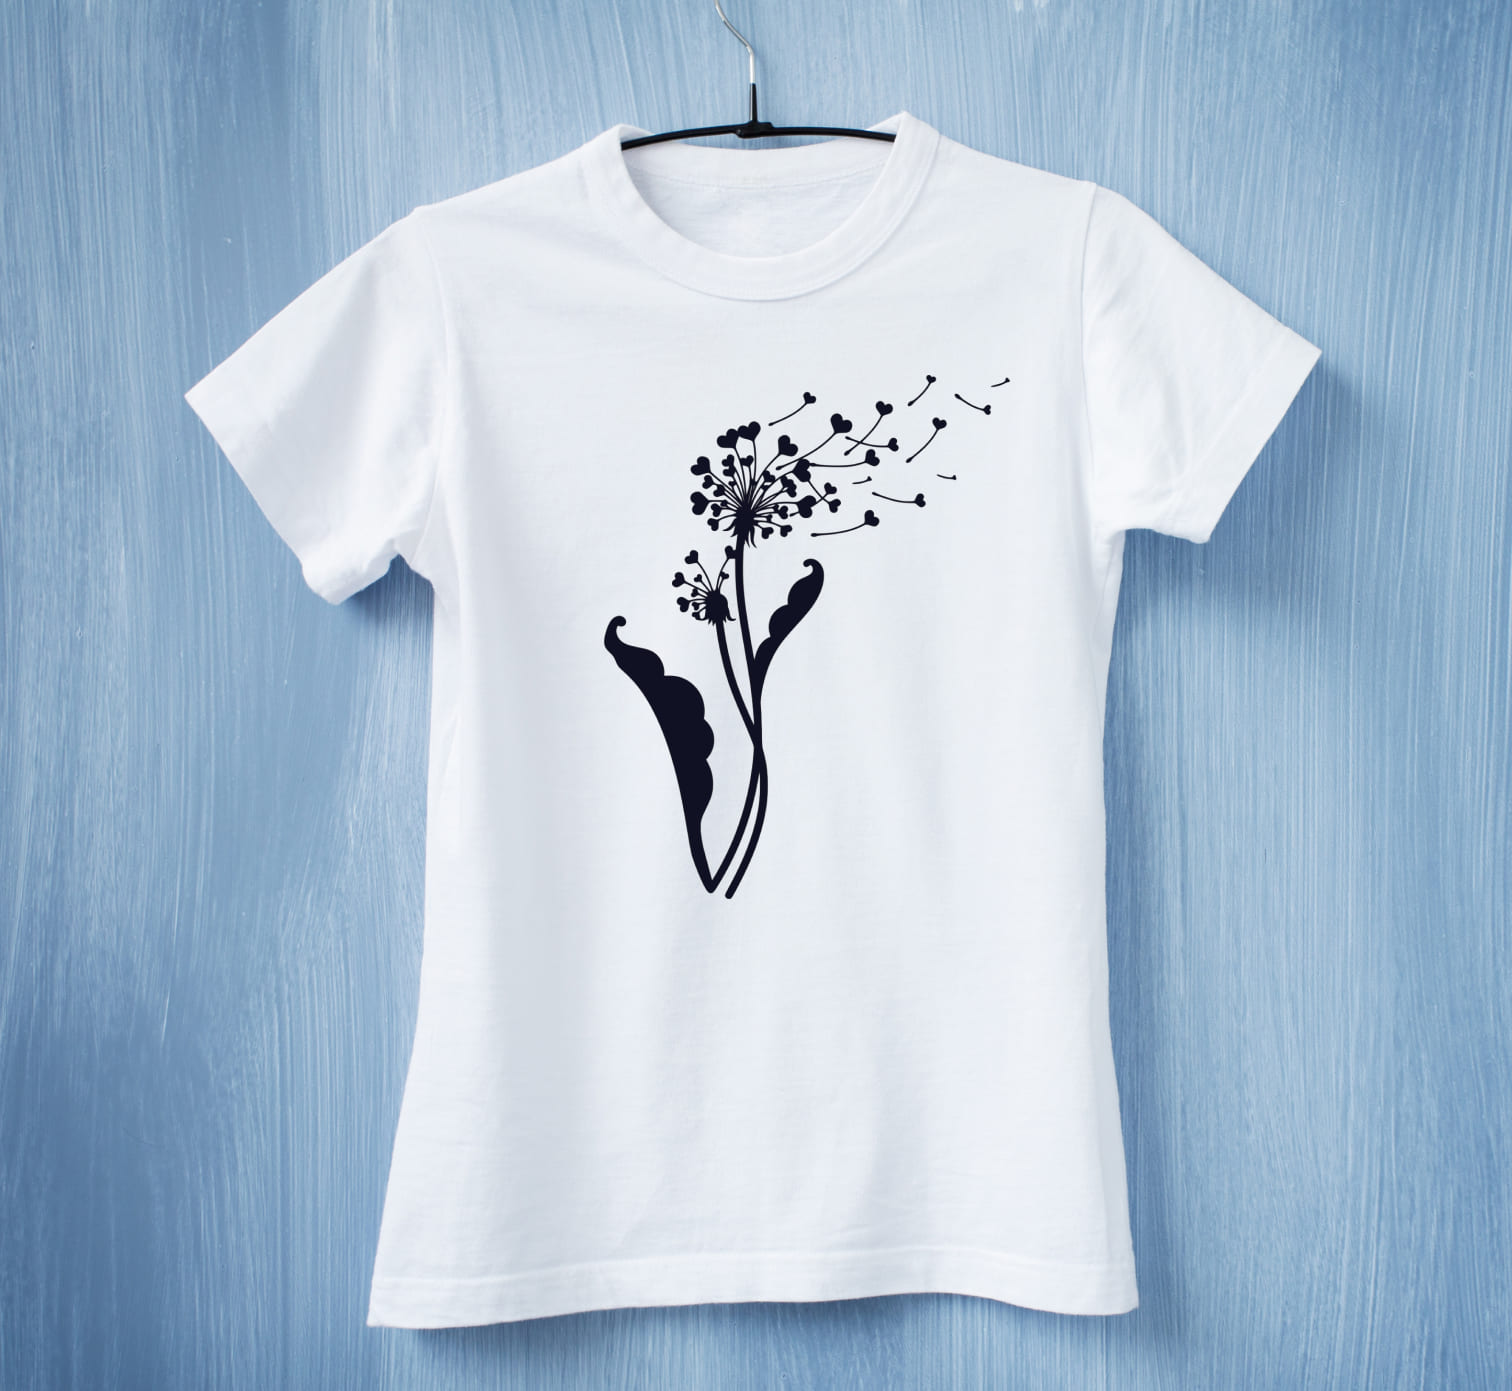 A white t-shirt with a black dandelion flower with black hearts on a blue background.